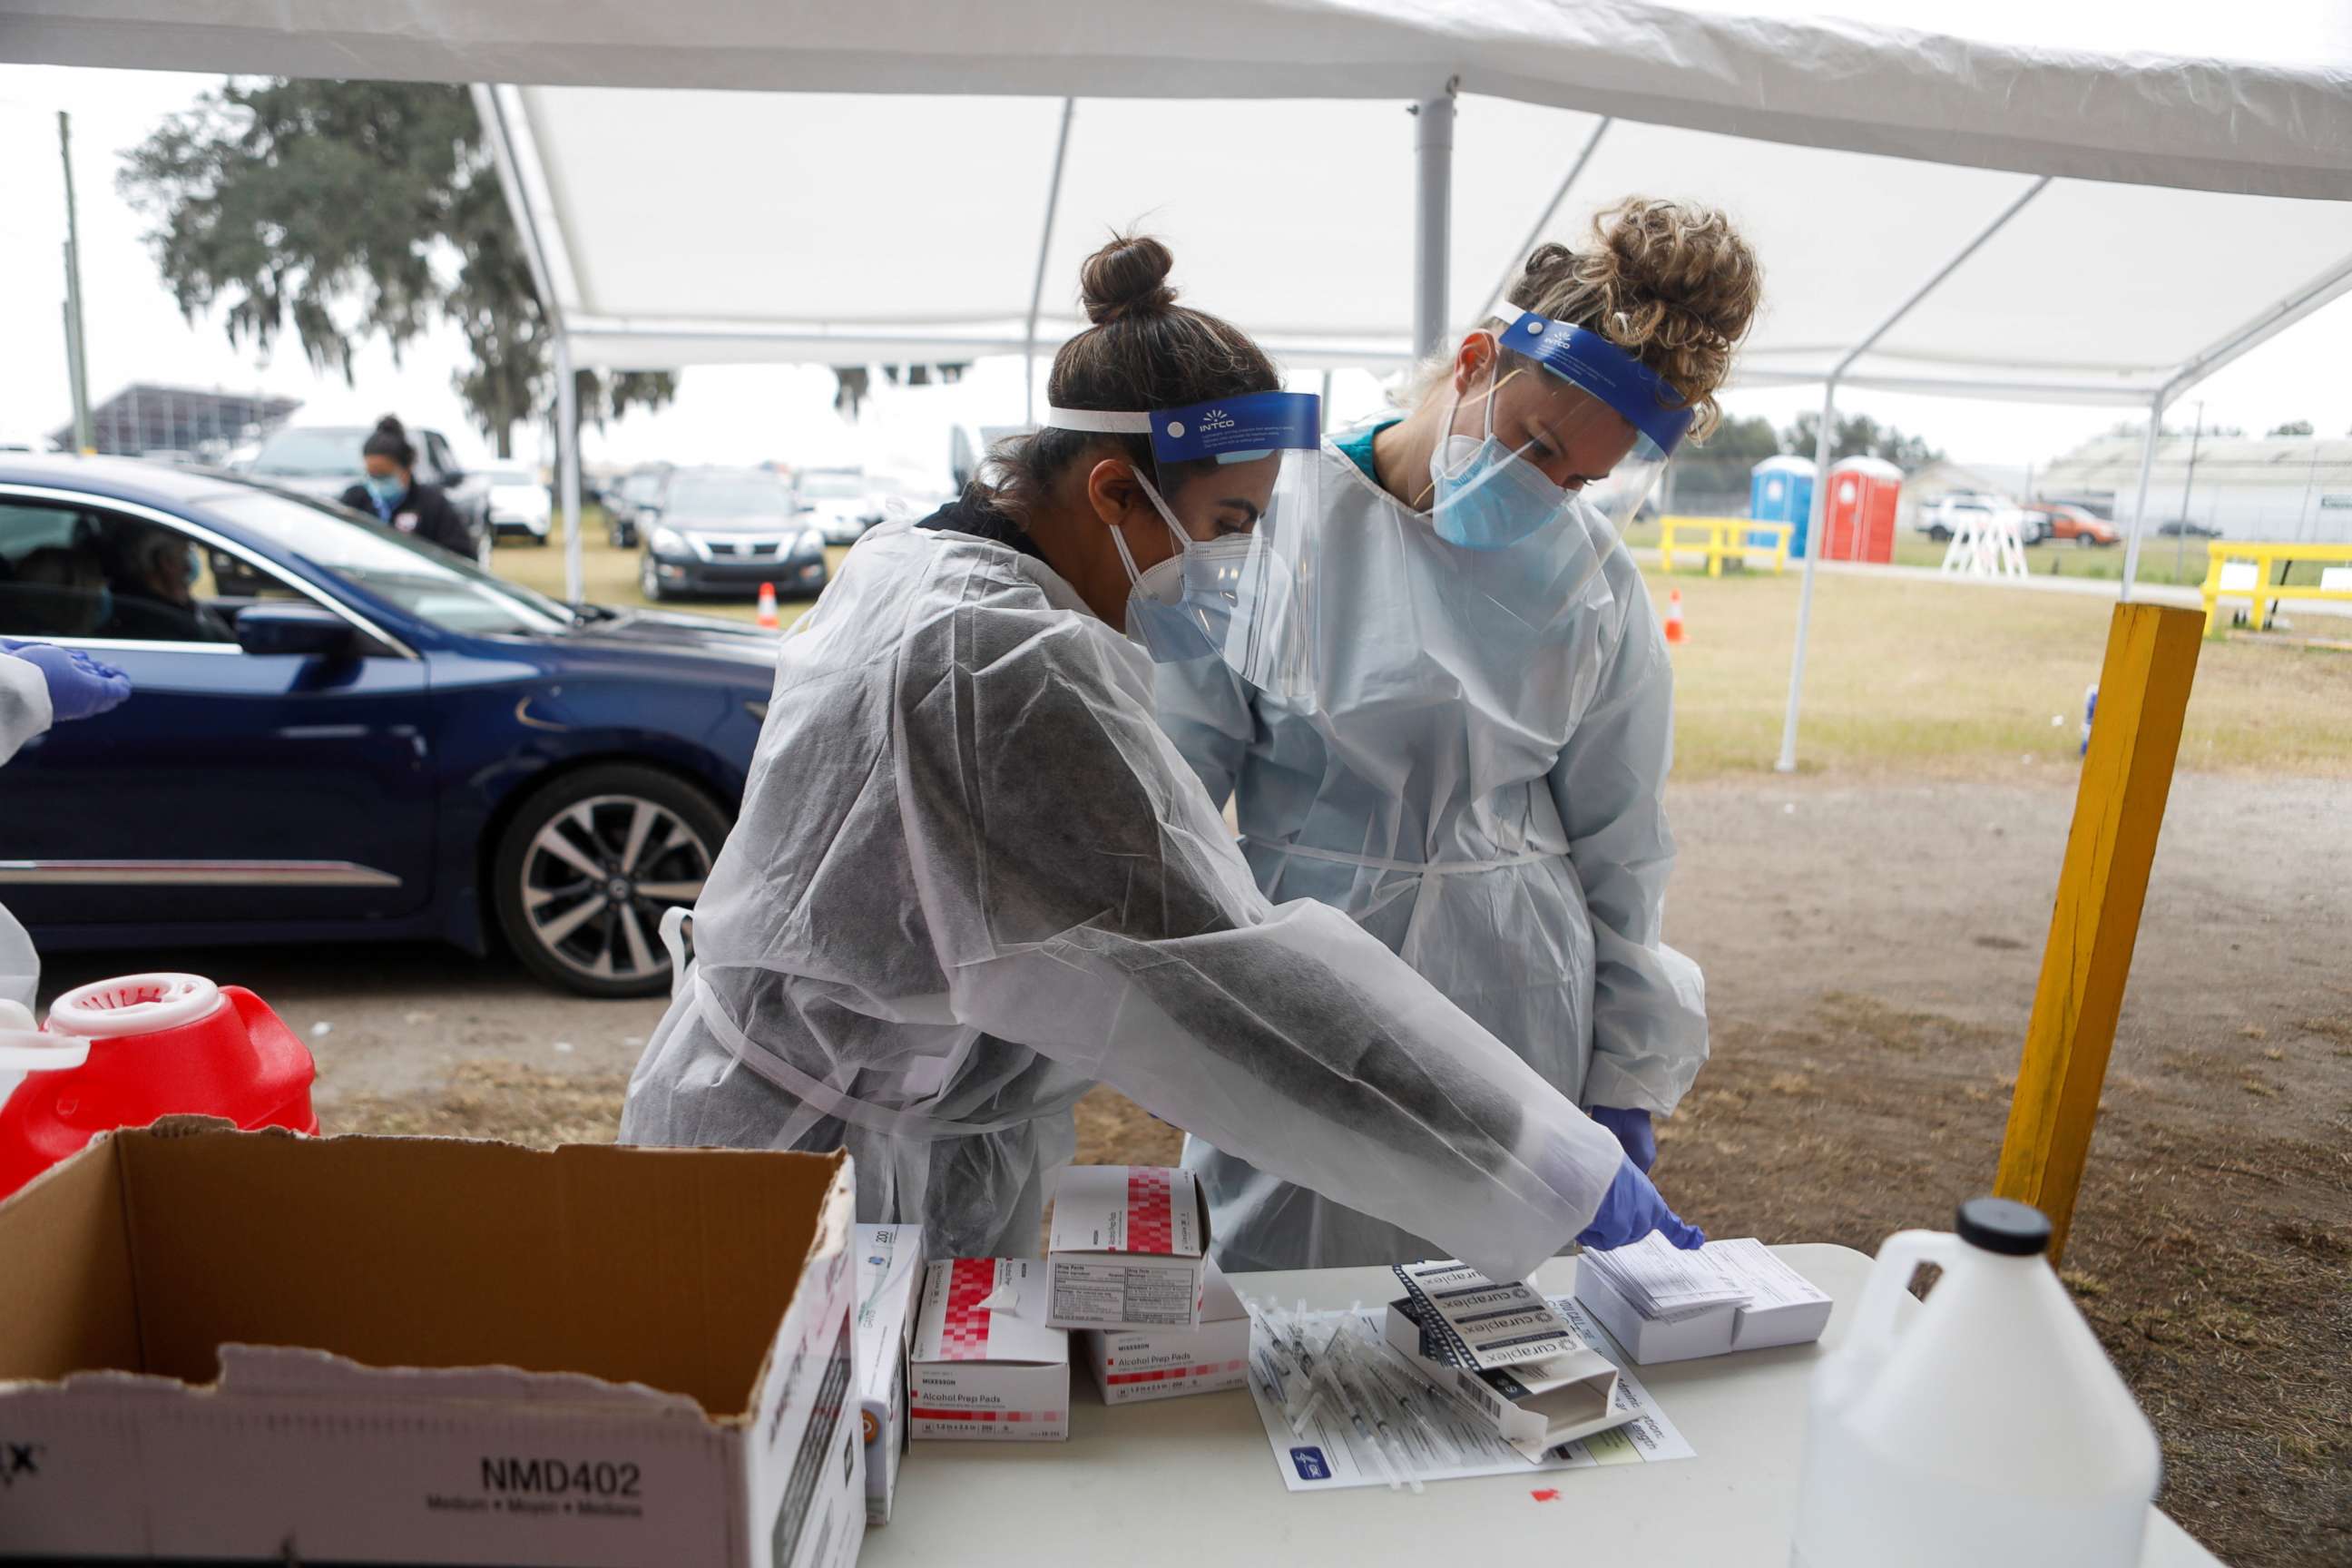 PHOTO: Medical workers prepare to administer Pfizer-BioNTech COVID-19 vaccines at a drive-through COVID-19 vaccination site at the Strawberry Festival Fairgrounds in Plant City, Fla., Jan. 13, 2021.